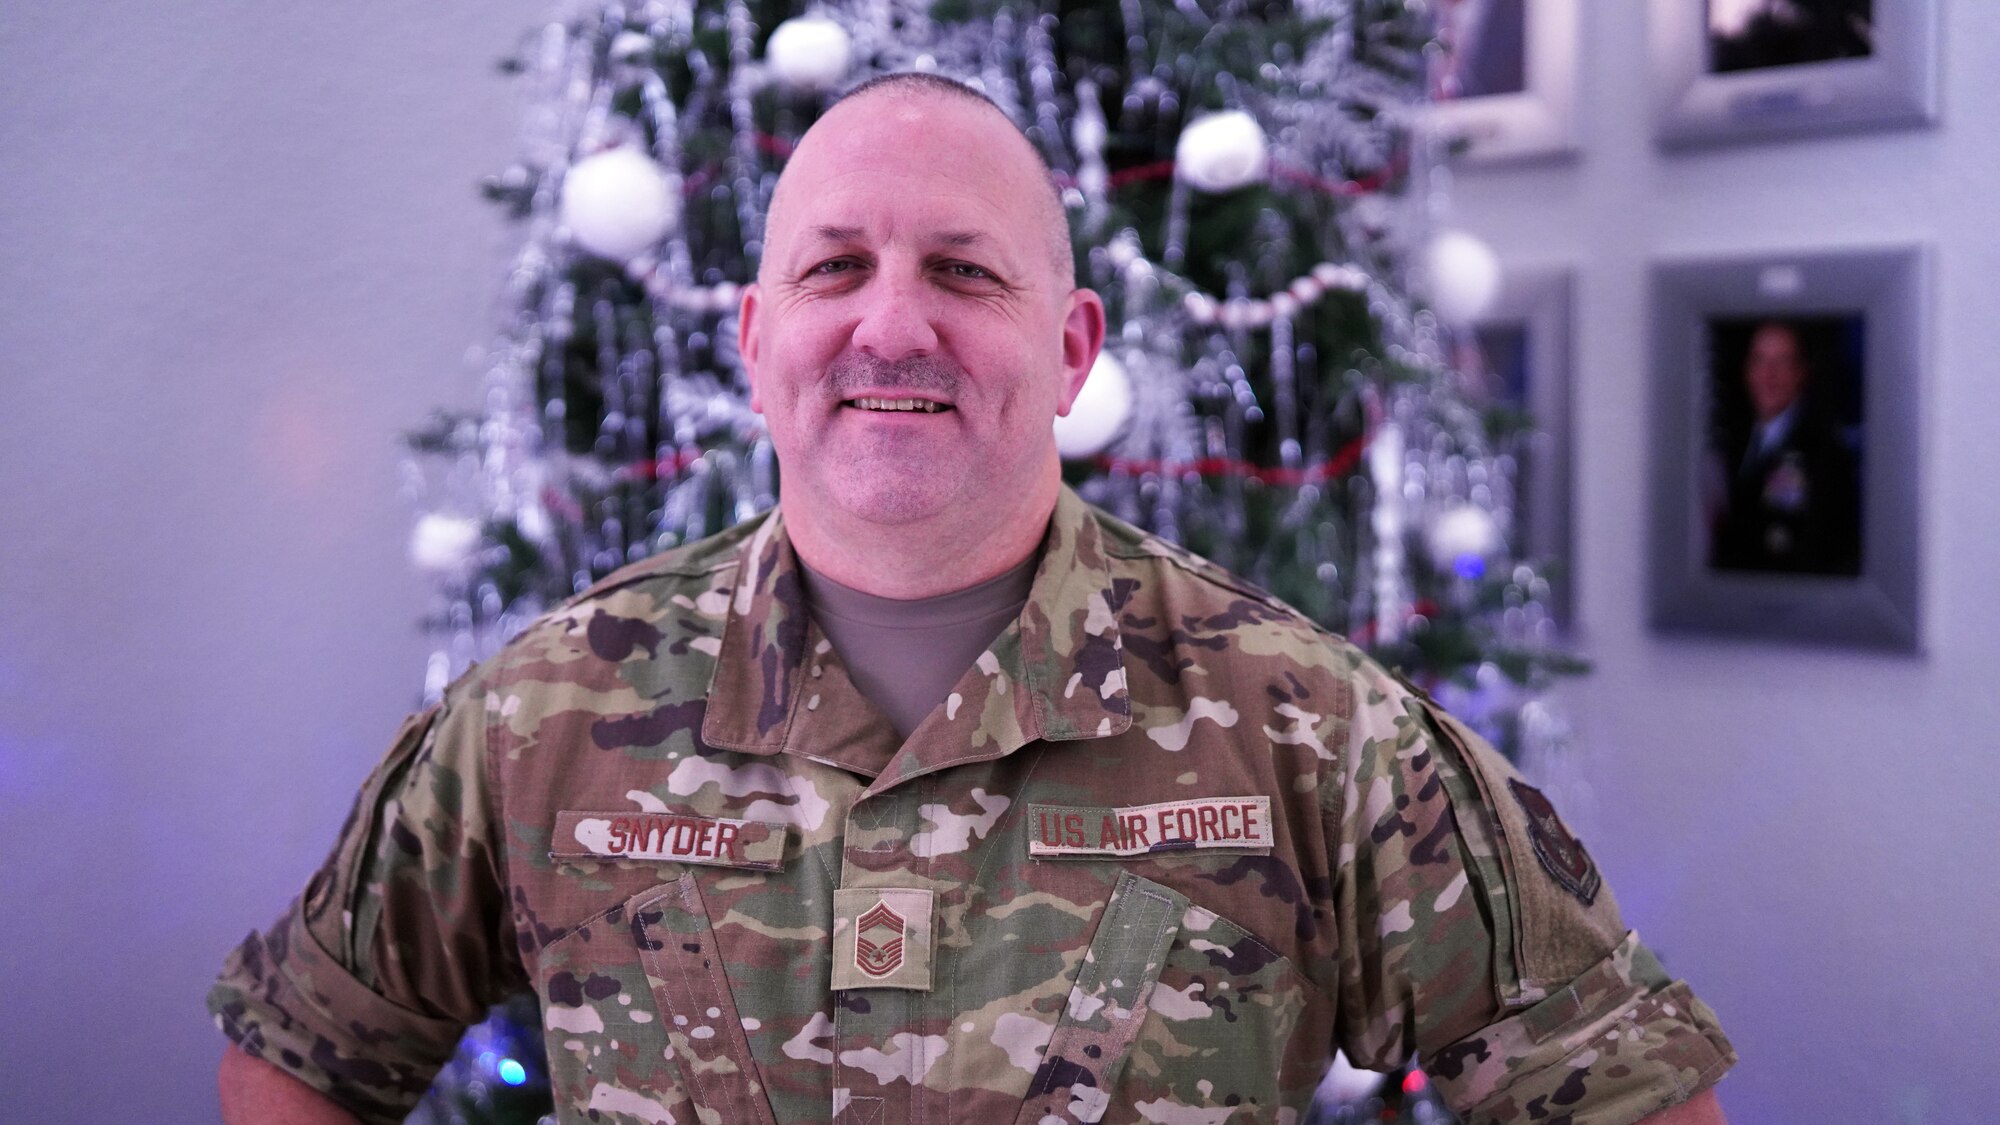 Chief Master Sgt. Monte Snyder, 403rd Wing performance process manager, poses for a photo Dec. 5, at Keesler Air Force Base, Miss. Snyder is also a master resilience trainer for the wing and encourages everyone to have a G.R.E.A.T holiday season. (U.S. Air Force photo by Tech. Sgt. Christopher Carranza)